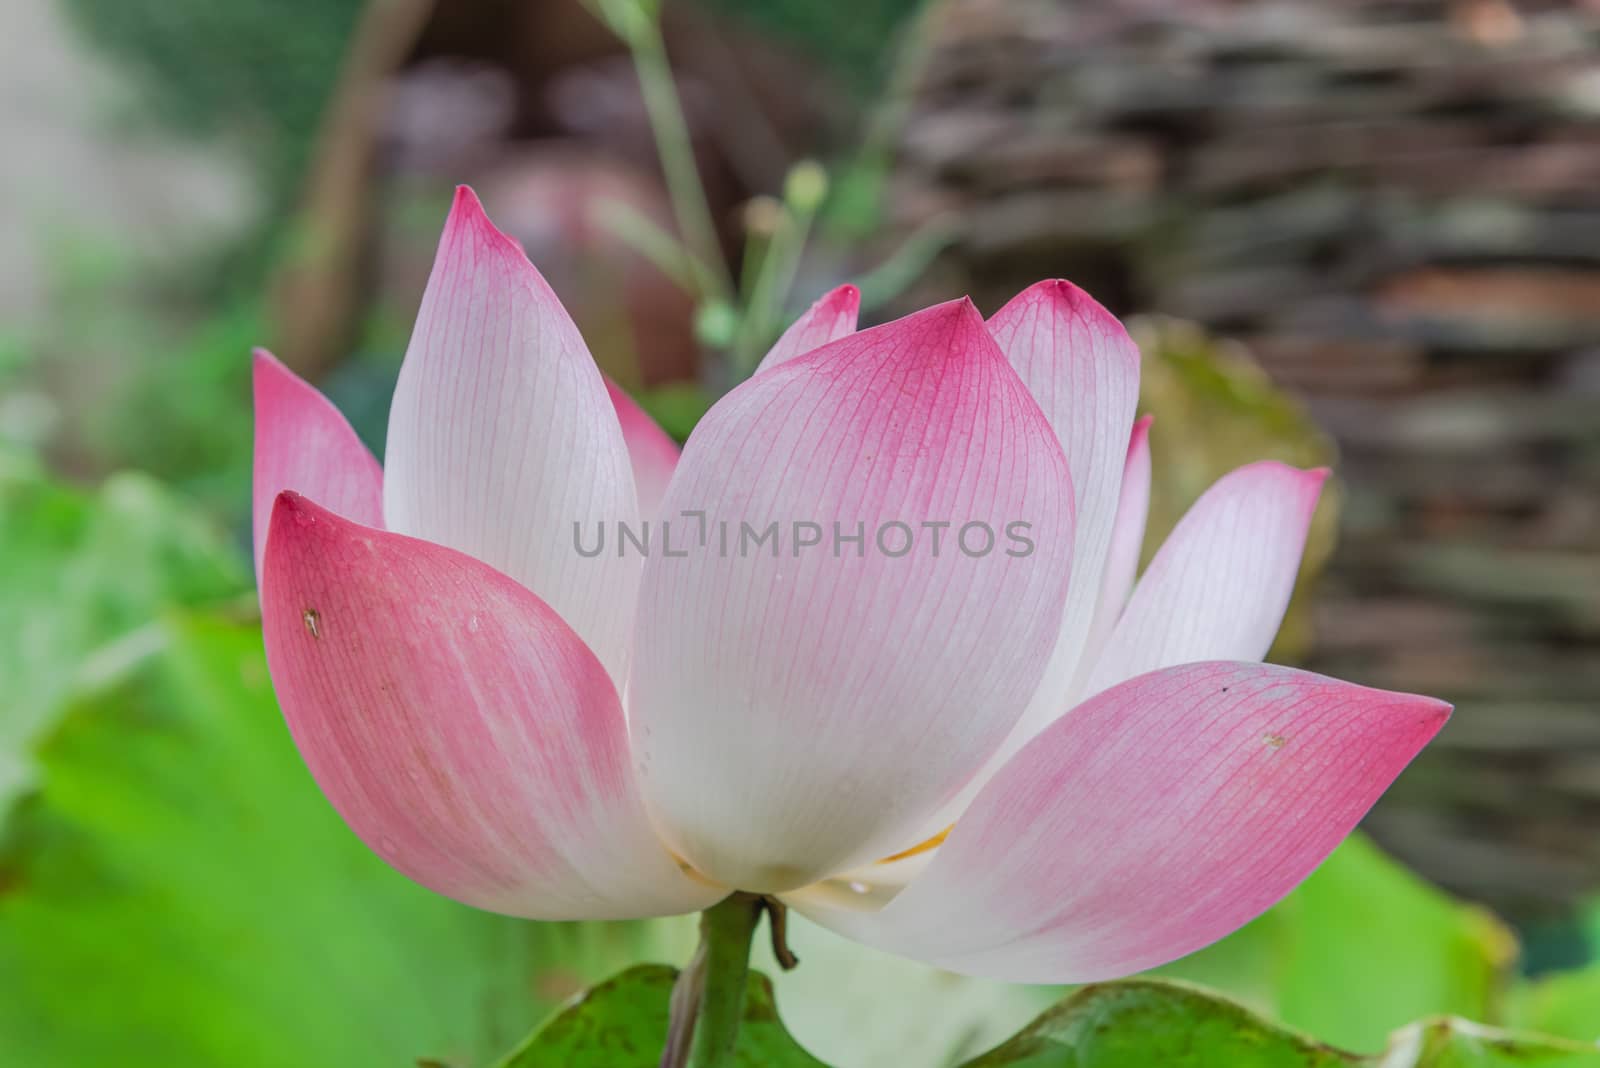 Blooming pink lotus flower with ceramic pot fountain jar in background by trongnguyen